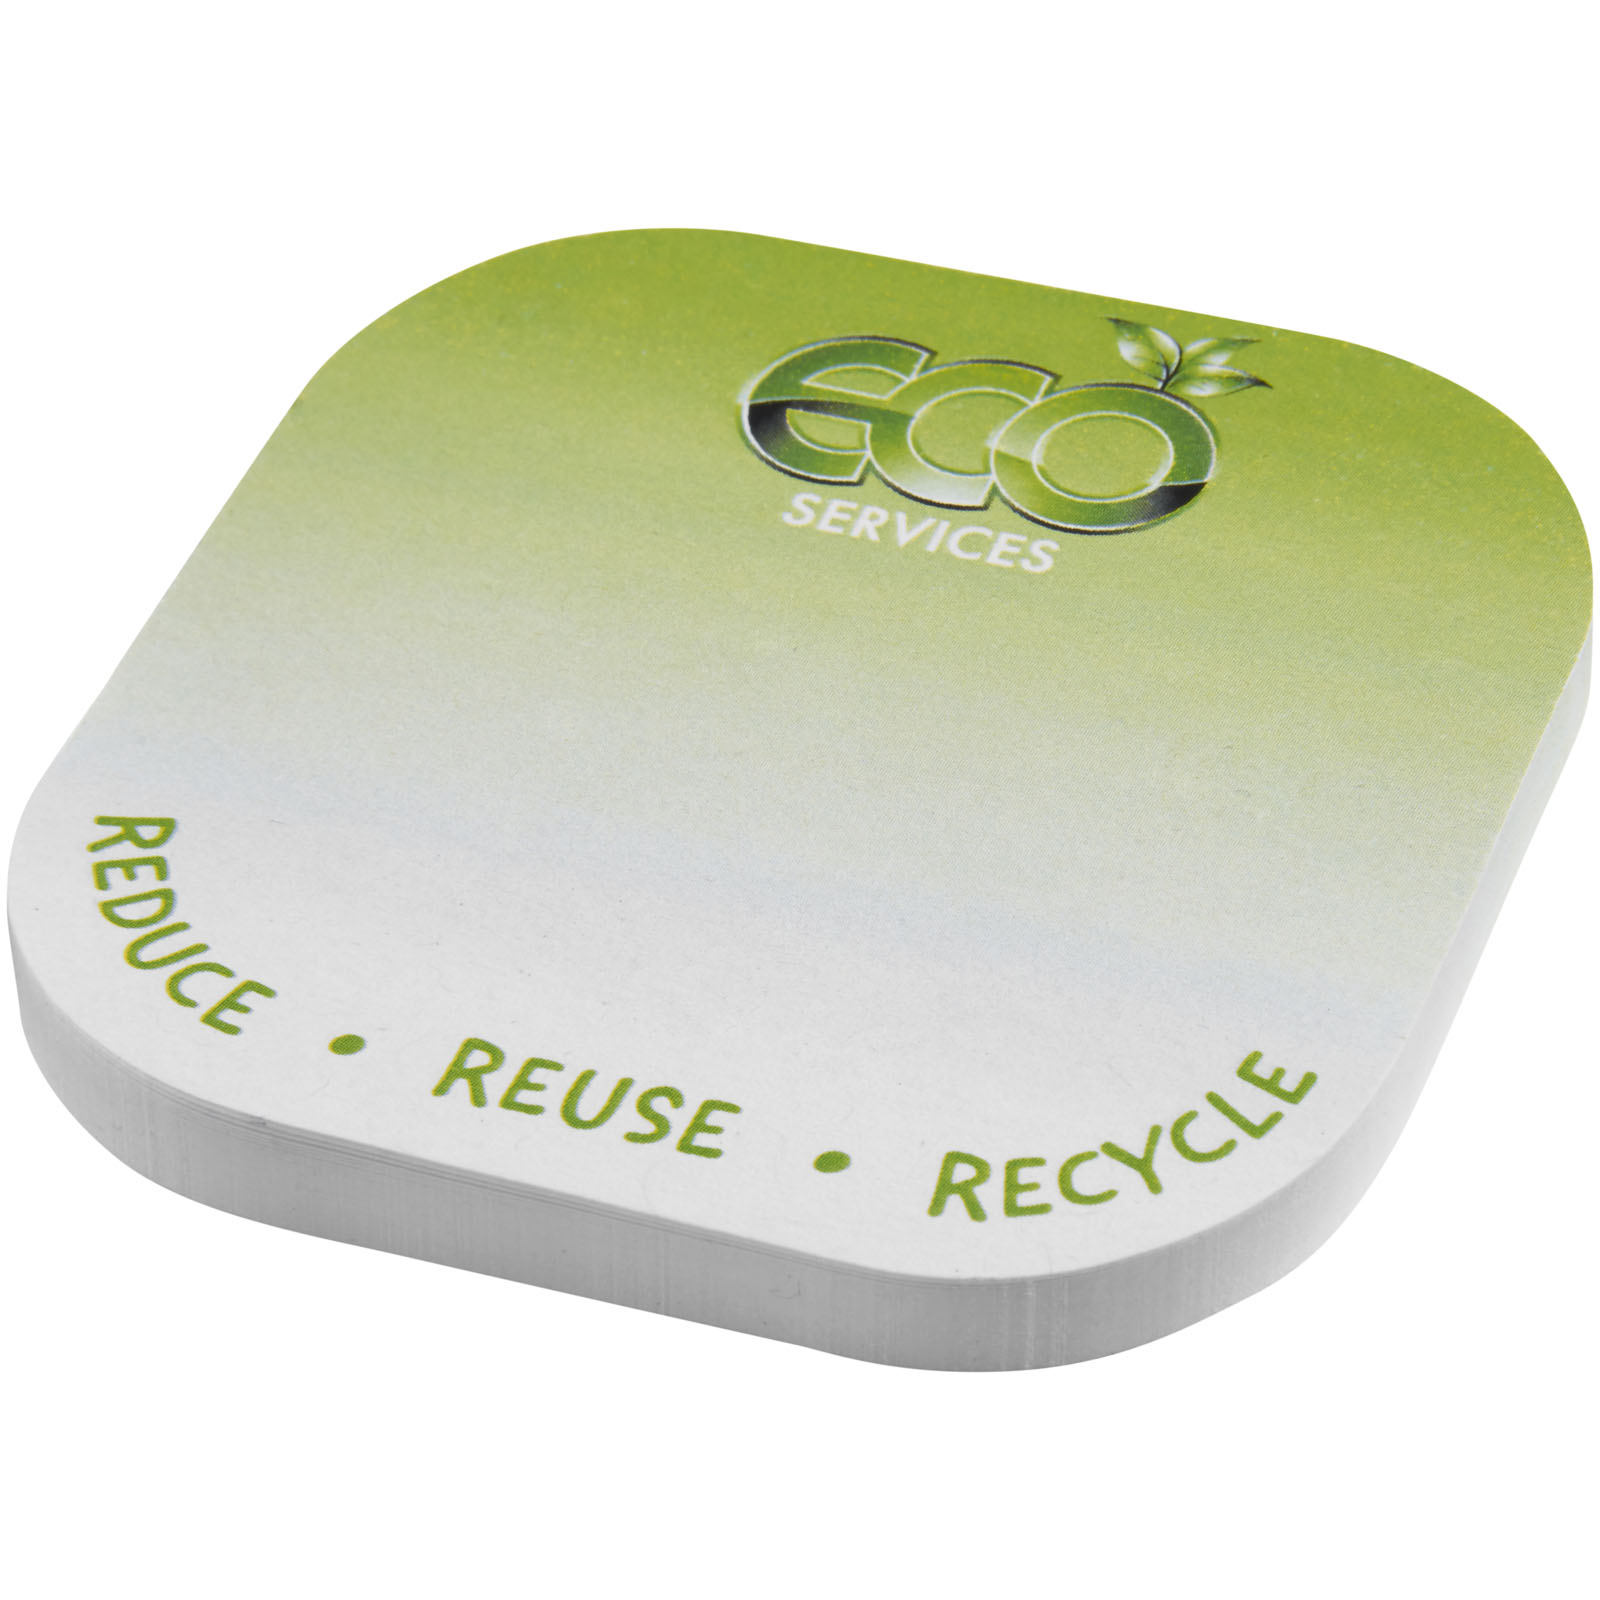 Sticky Notes - Sticky-Mate® square-shaped recycled sticky notes with rounded corners